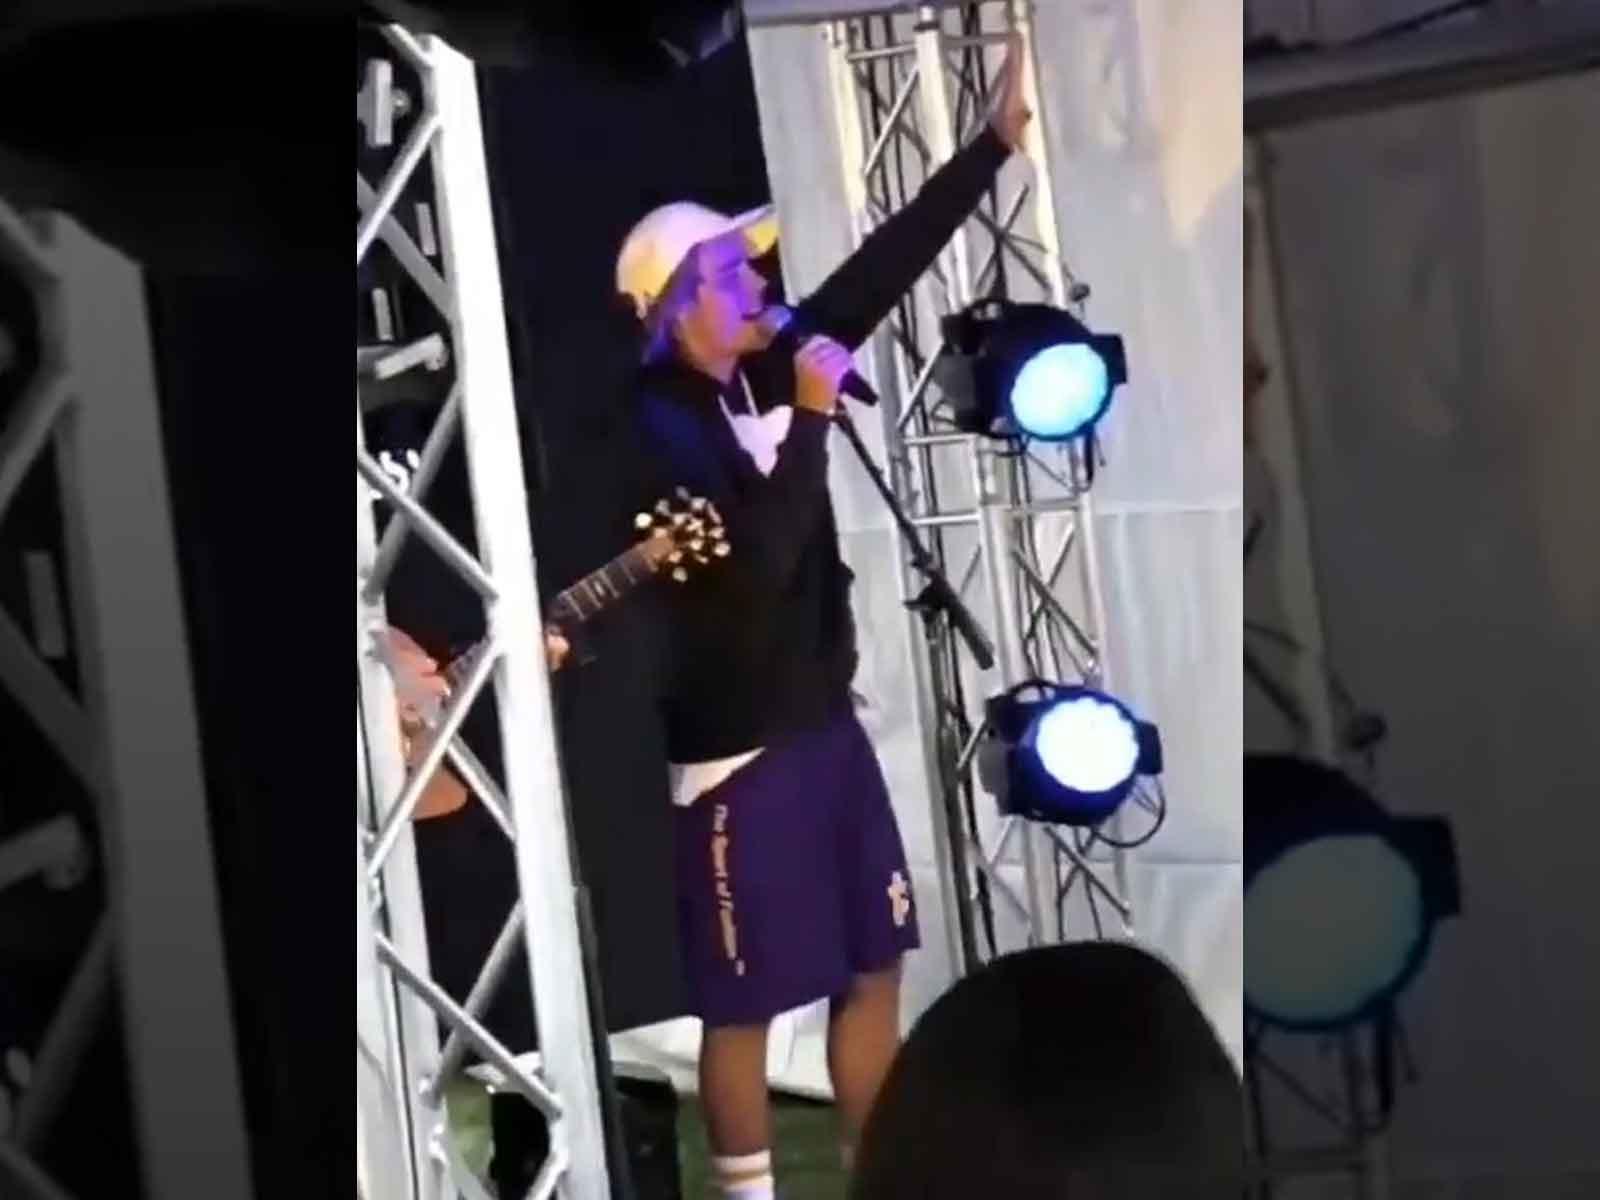 Justin Bieber Performs for the First Time in Months in Lowkey Coachella Set